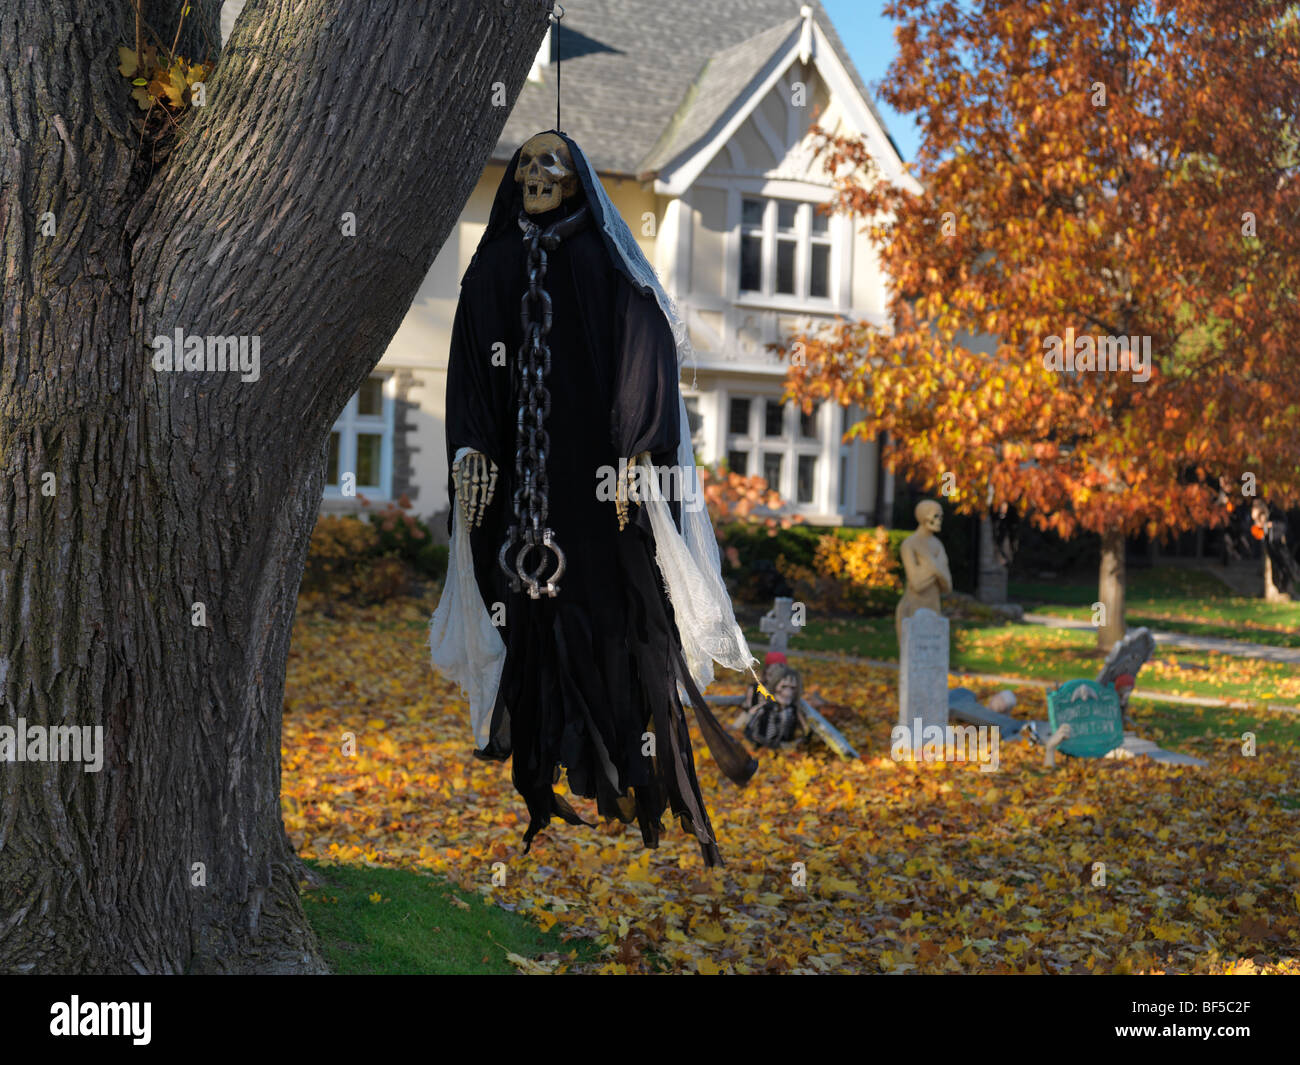 Decorated for Halloween House Stock Photo - Alamy